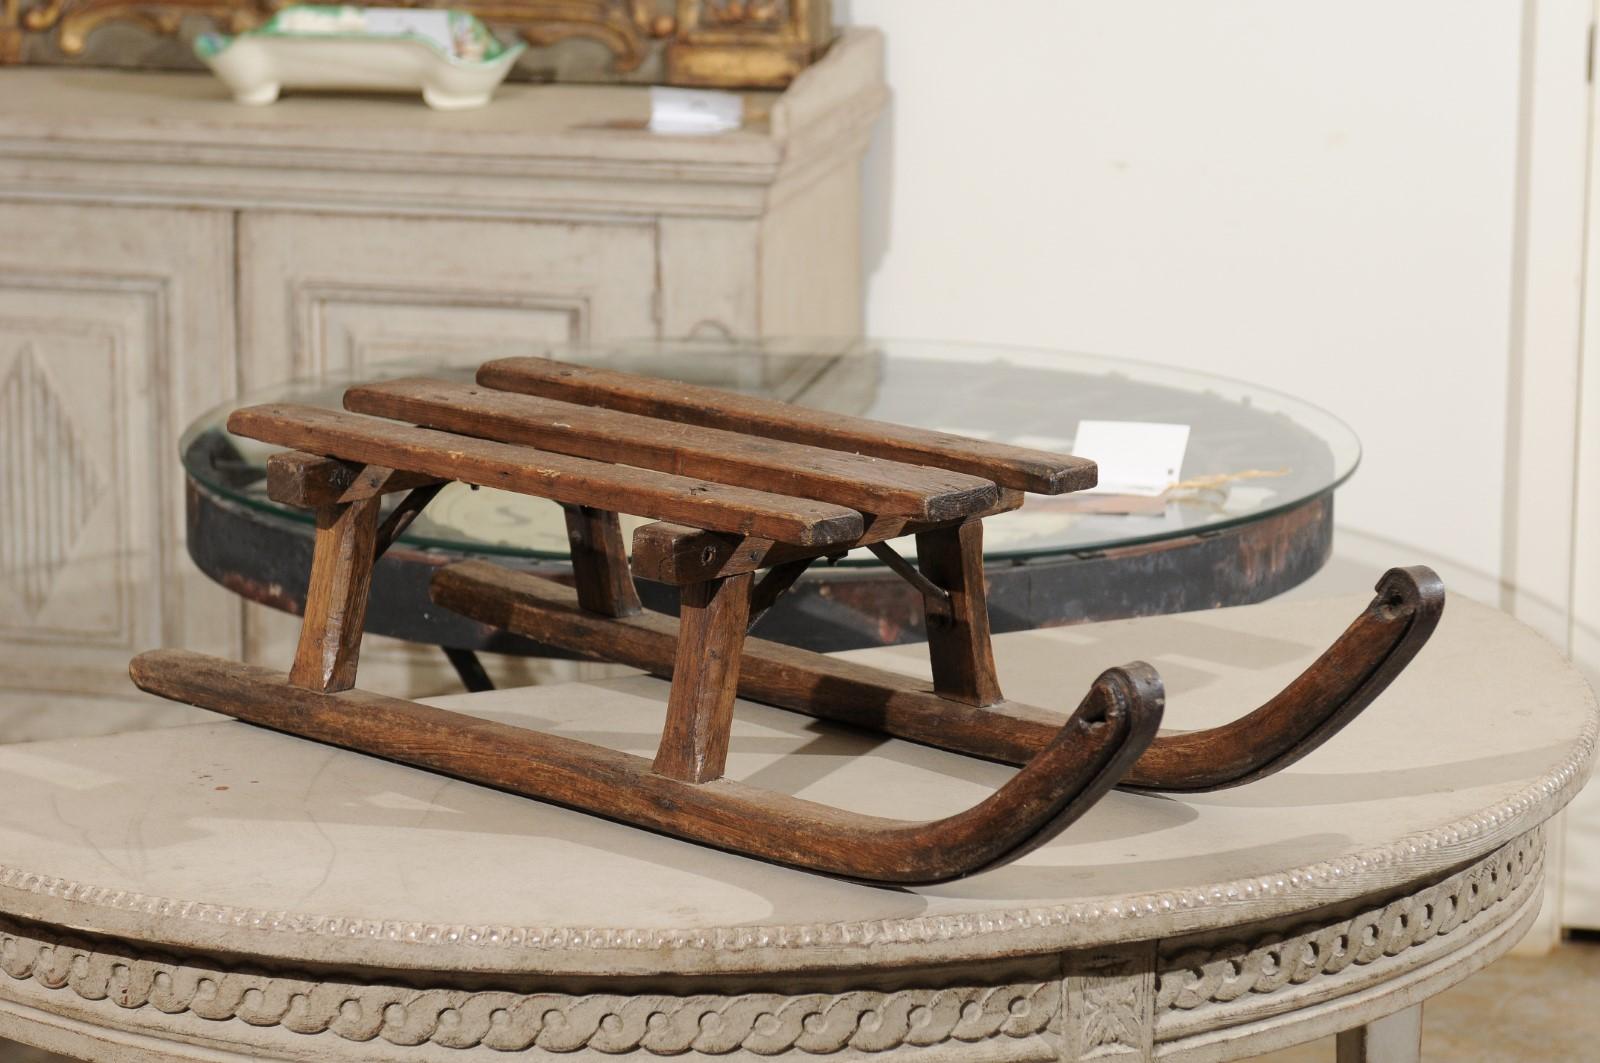 A French rustic wooden sled from the 19th century with iron braces. Charming our eyes with its rustic appearance and nicely weathered patina, this French sled features a rectangular seat made of three wooden slats resting on a curving base, ideal